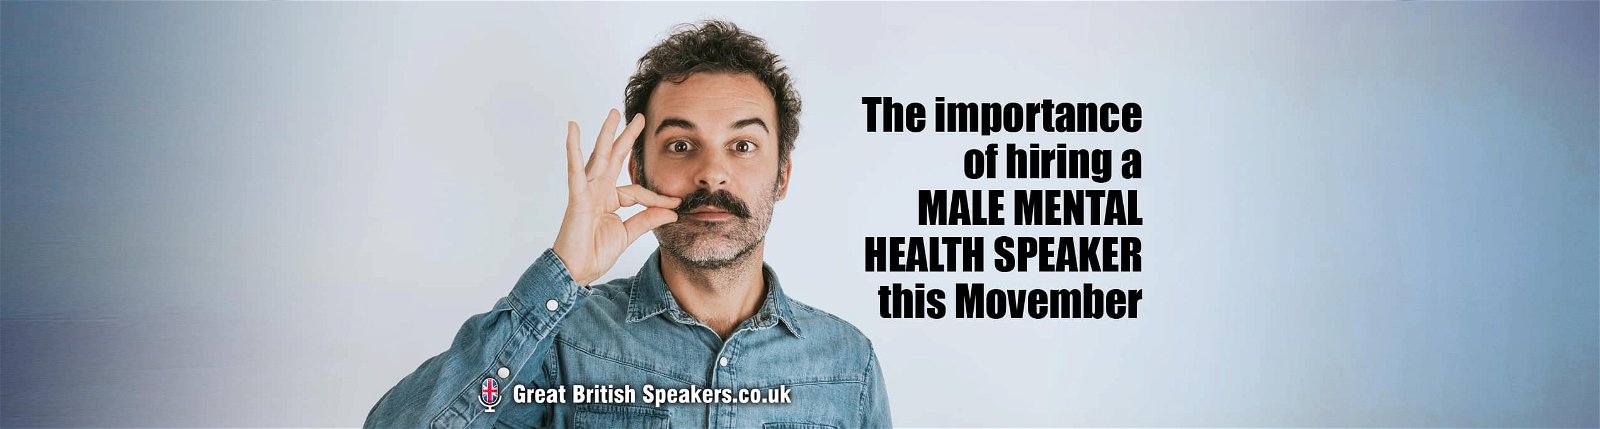 Hire a male mental health speaker for Movember at talent agent Great British Speakers